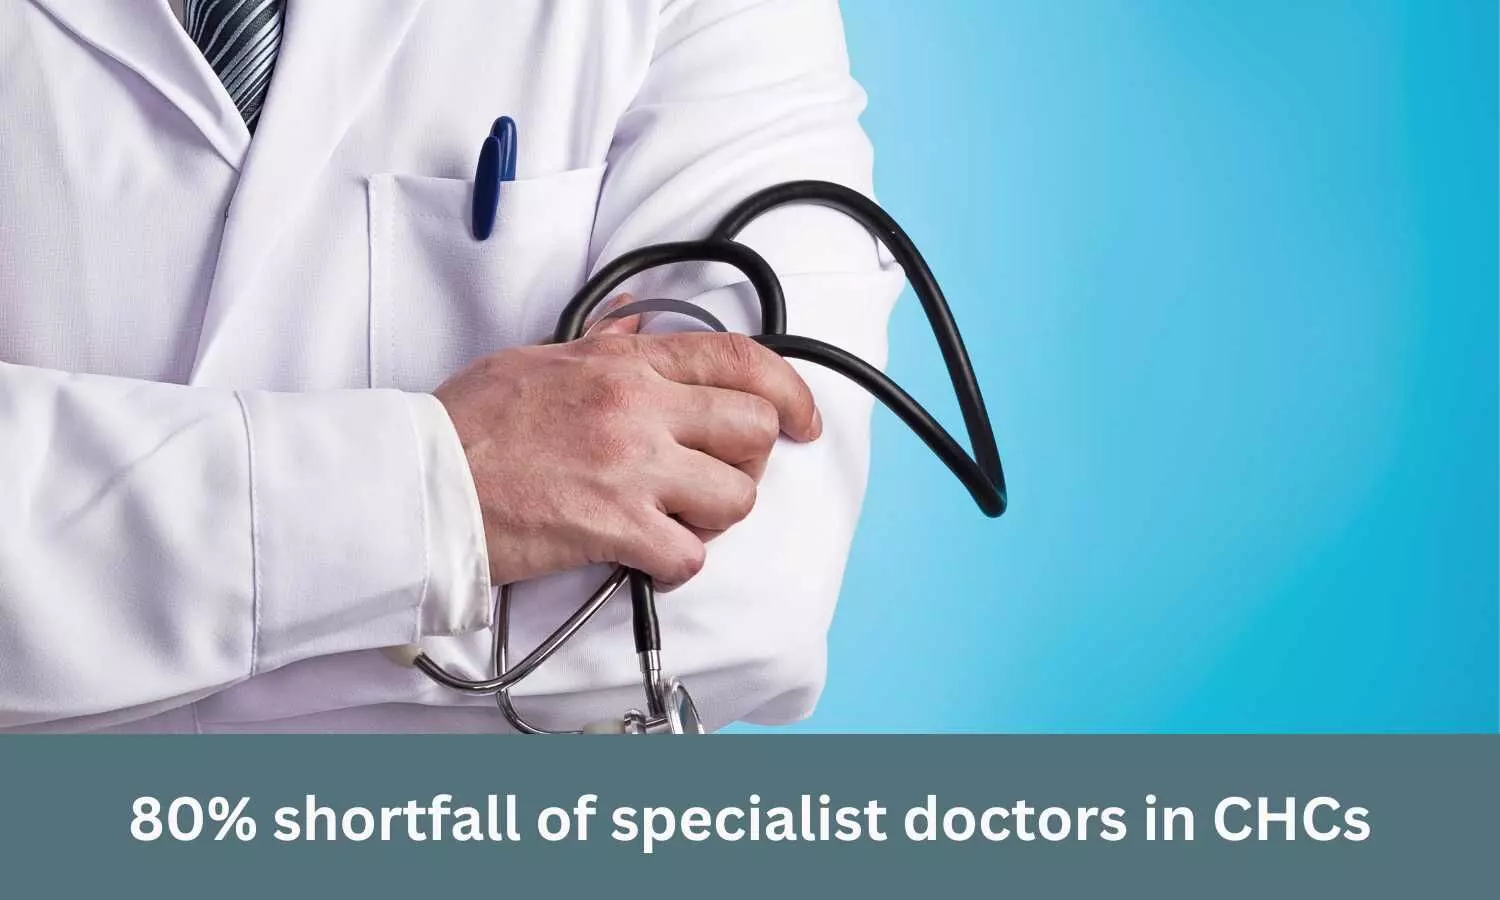 CHCs face 80 percent shortage of specialist doctors, reveals Health Ministry report